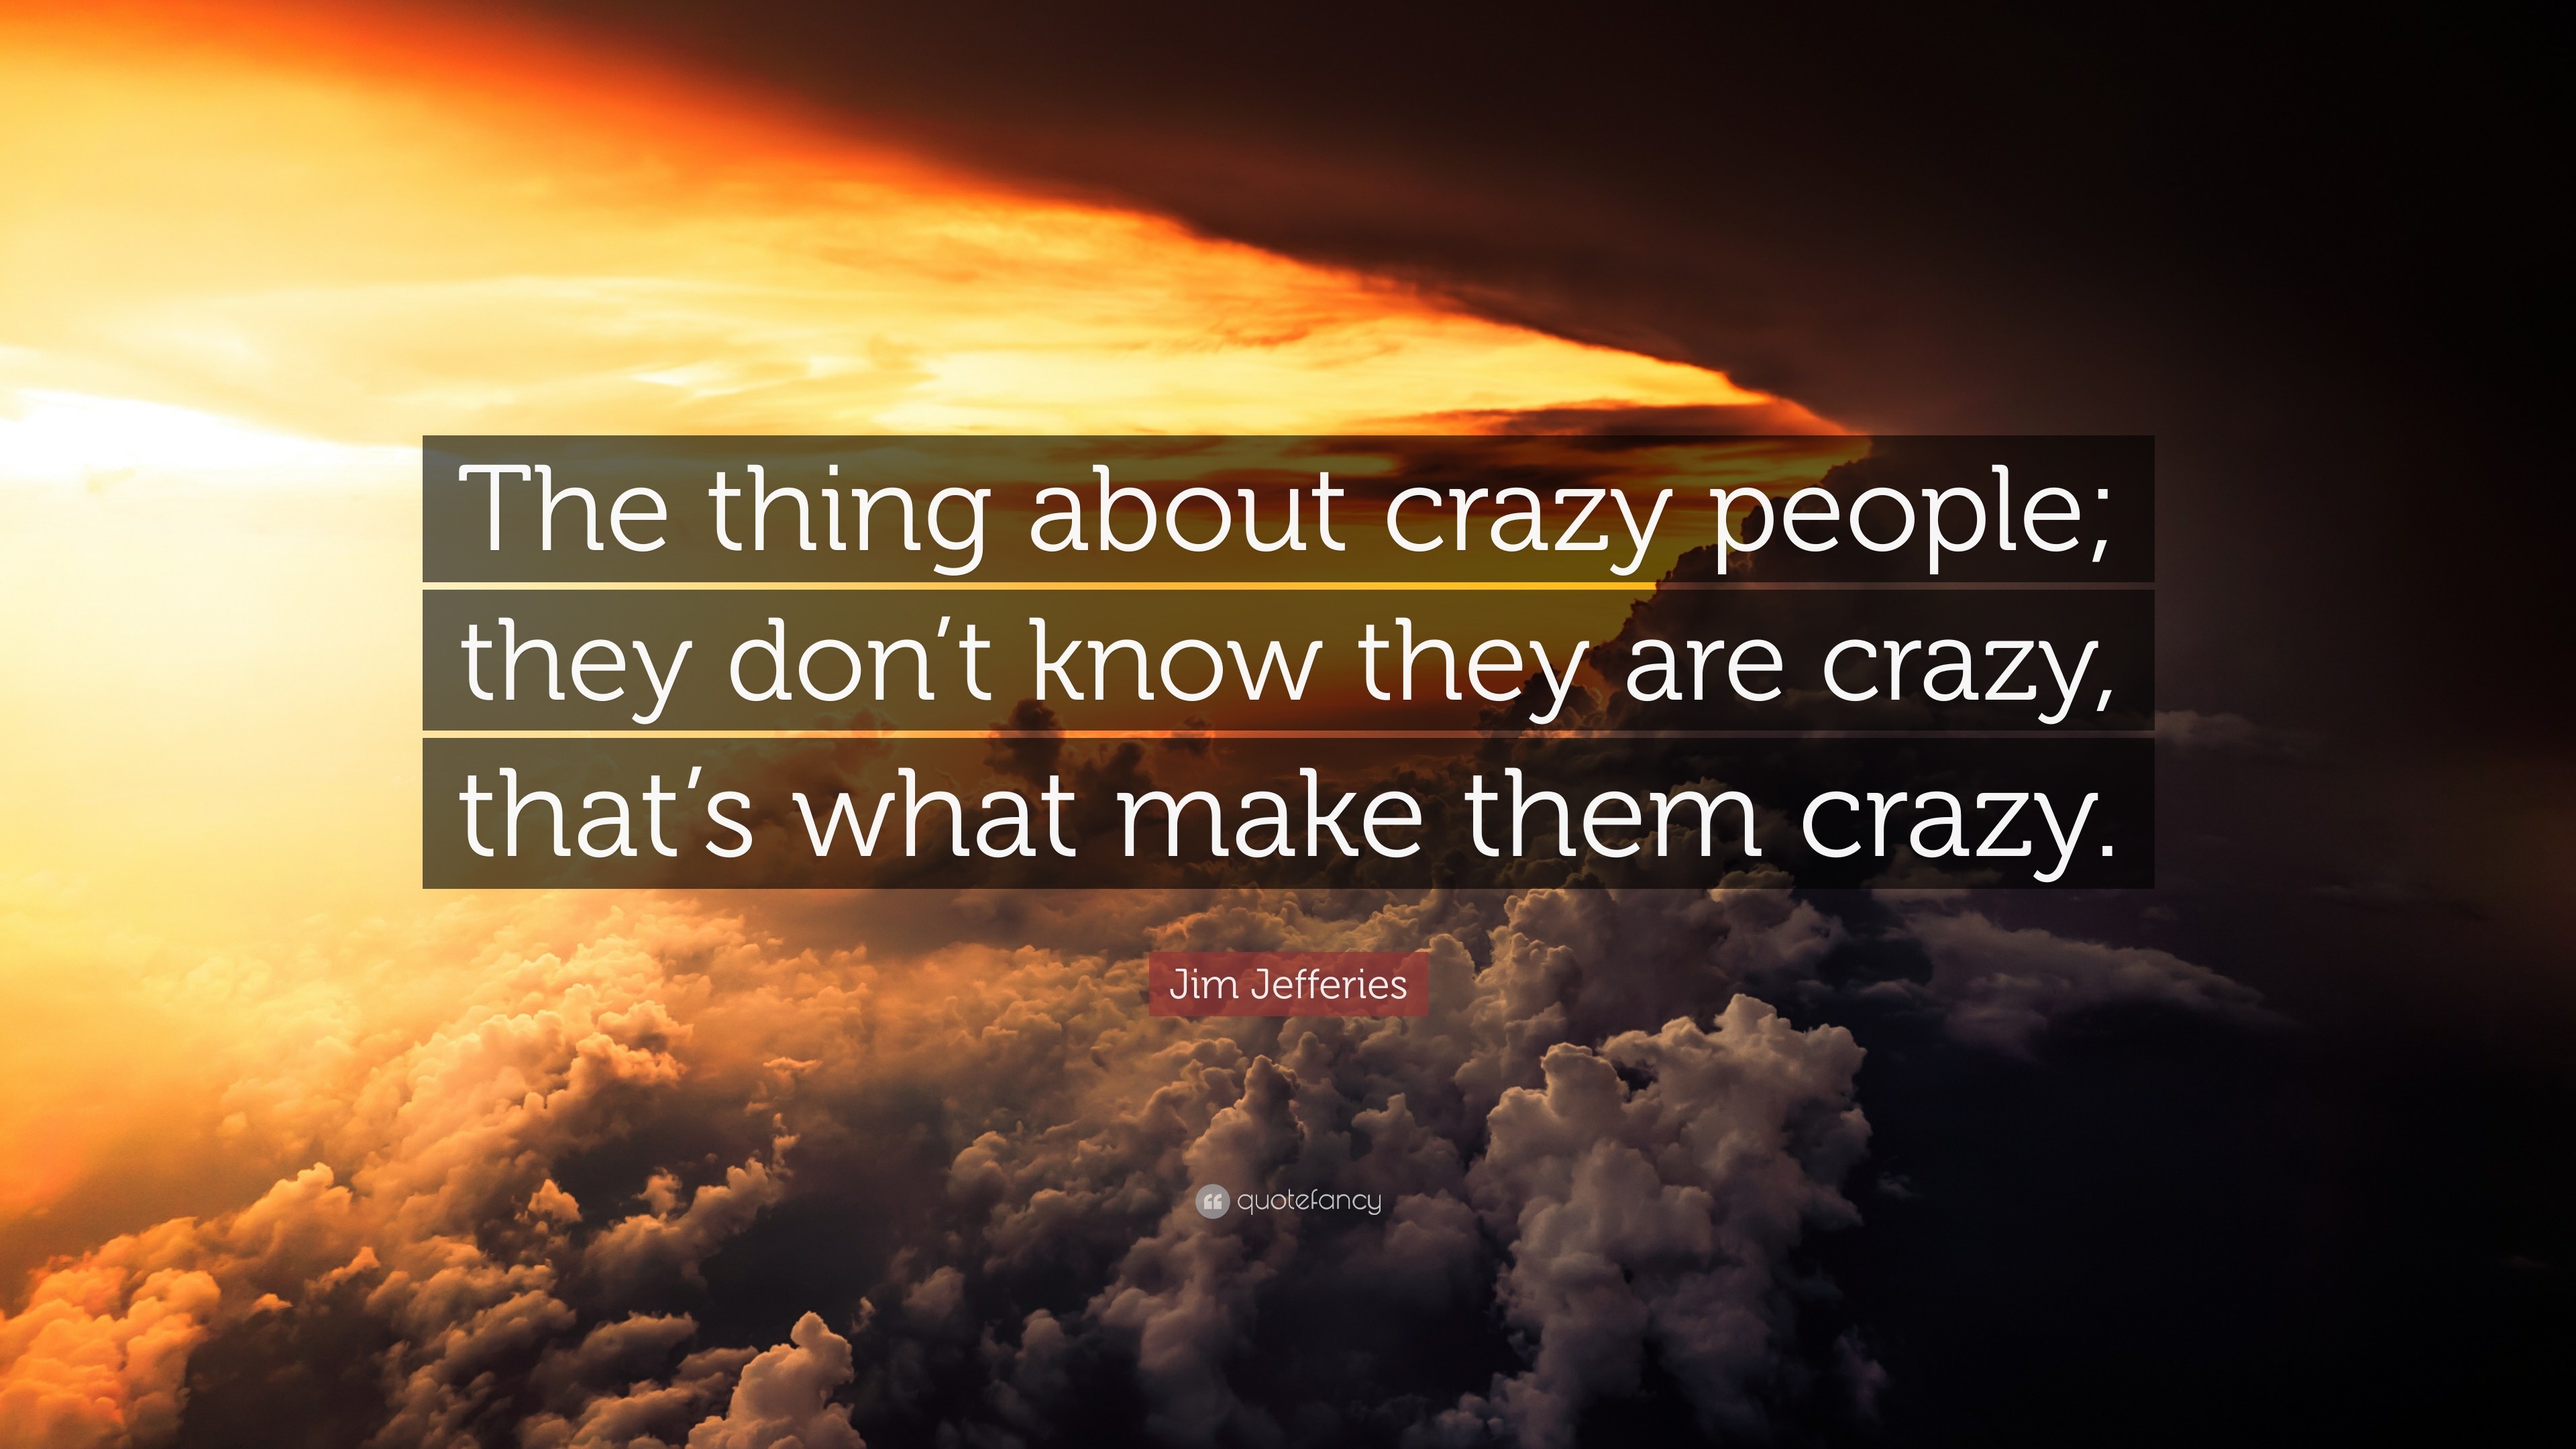 Jim Jefferies Quote: "The thing about crazy people; they ...